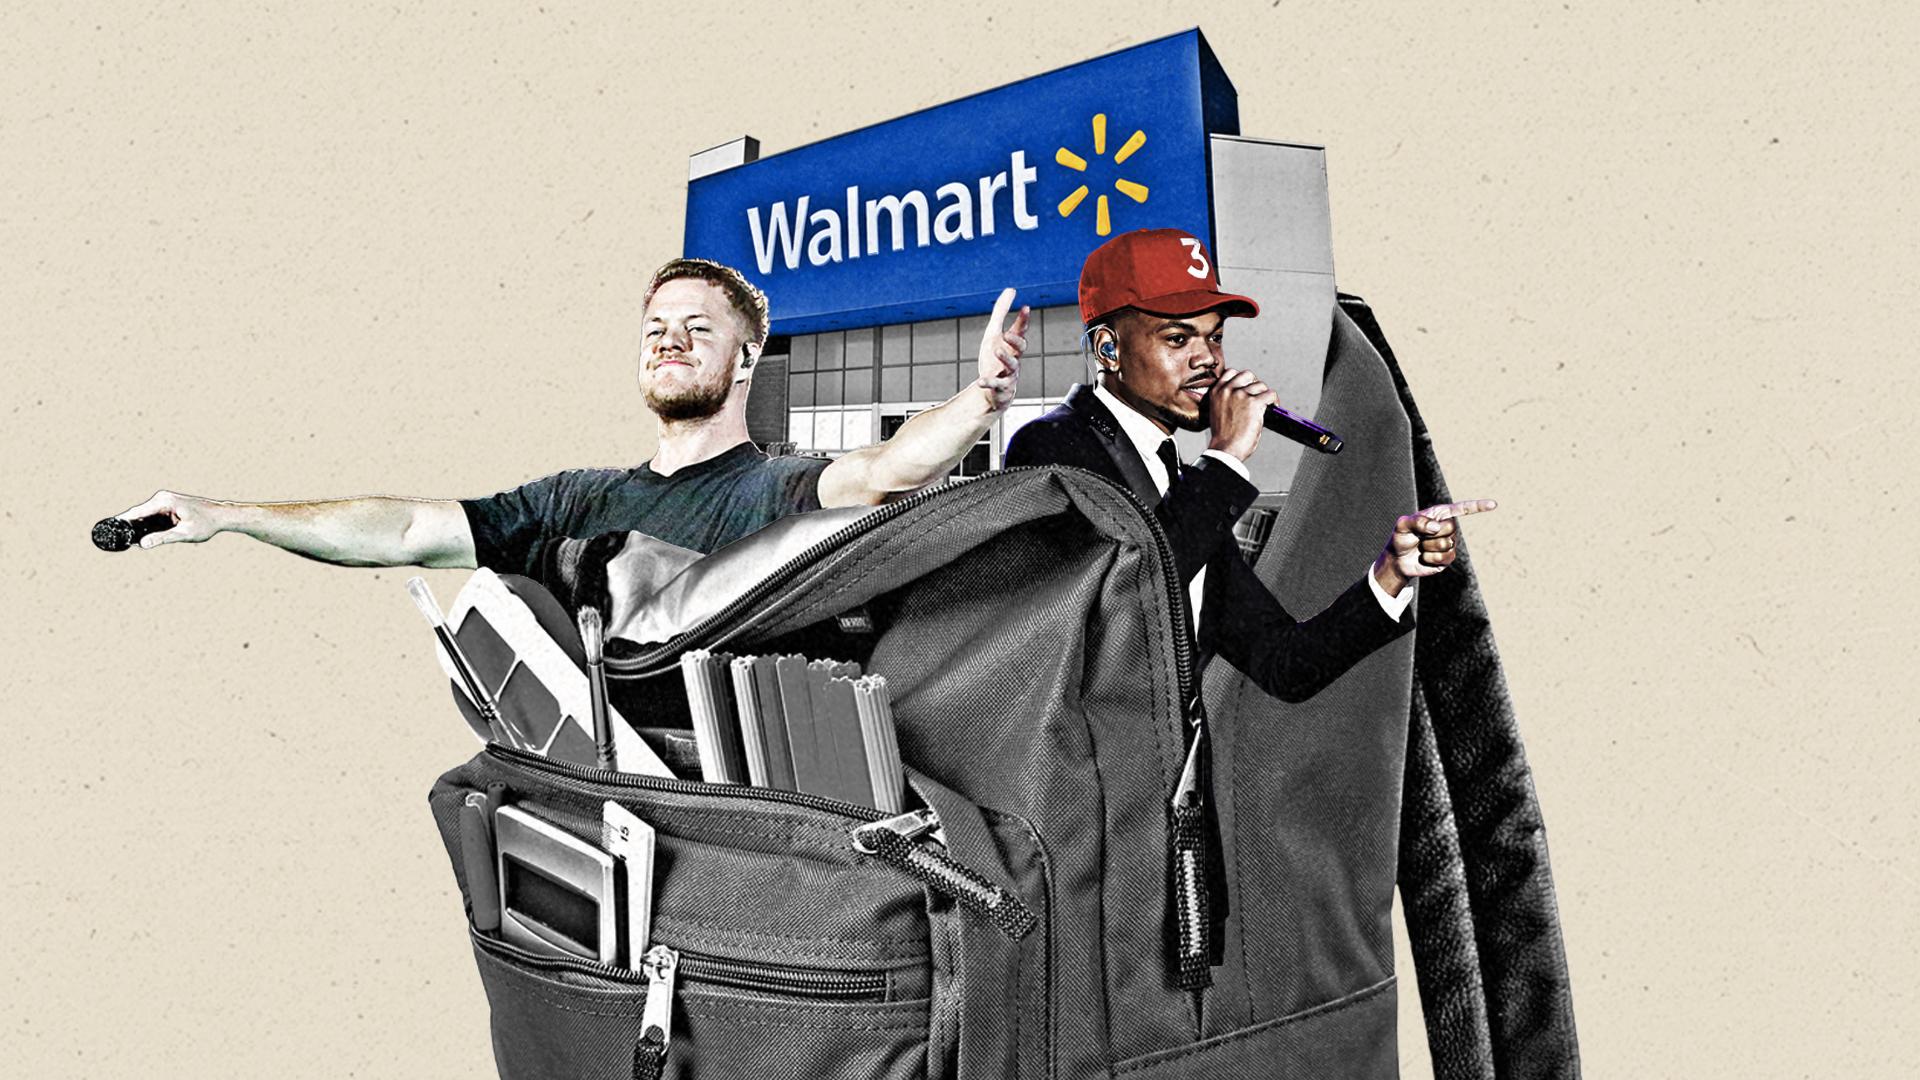 Back-to-school shopping has changed forever. Find out how Walmart is meeting the moment.